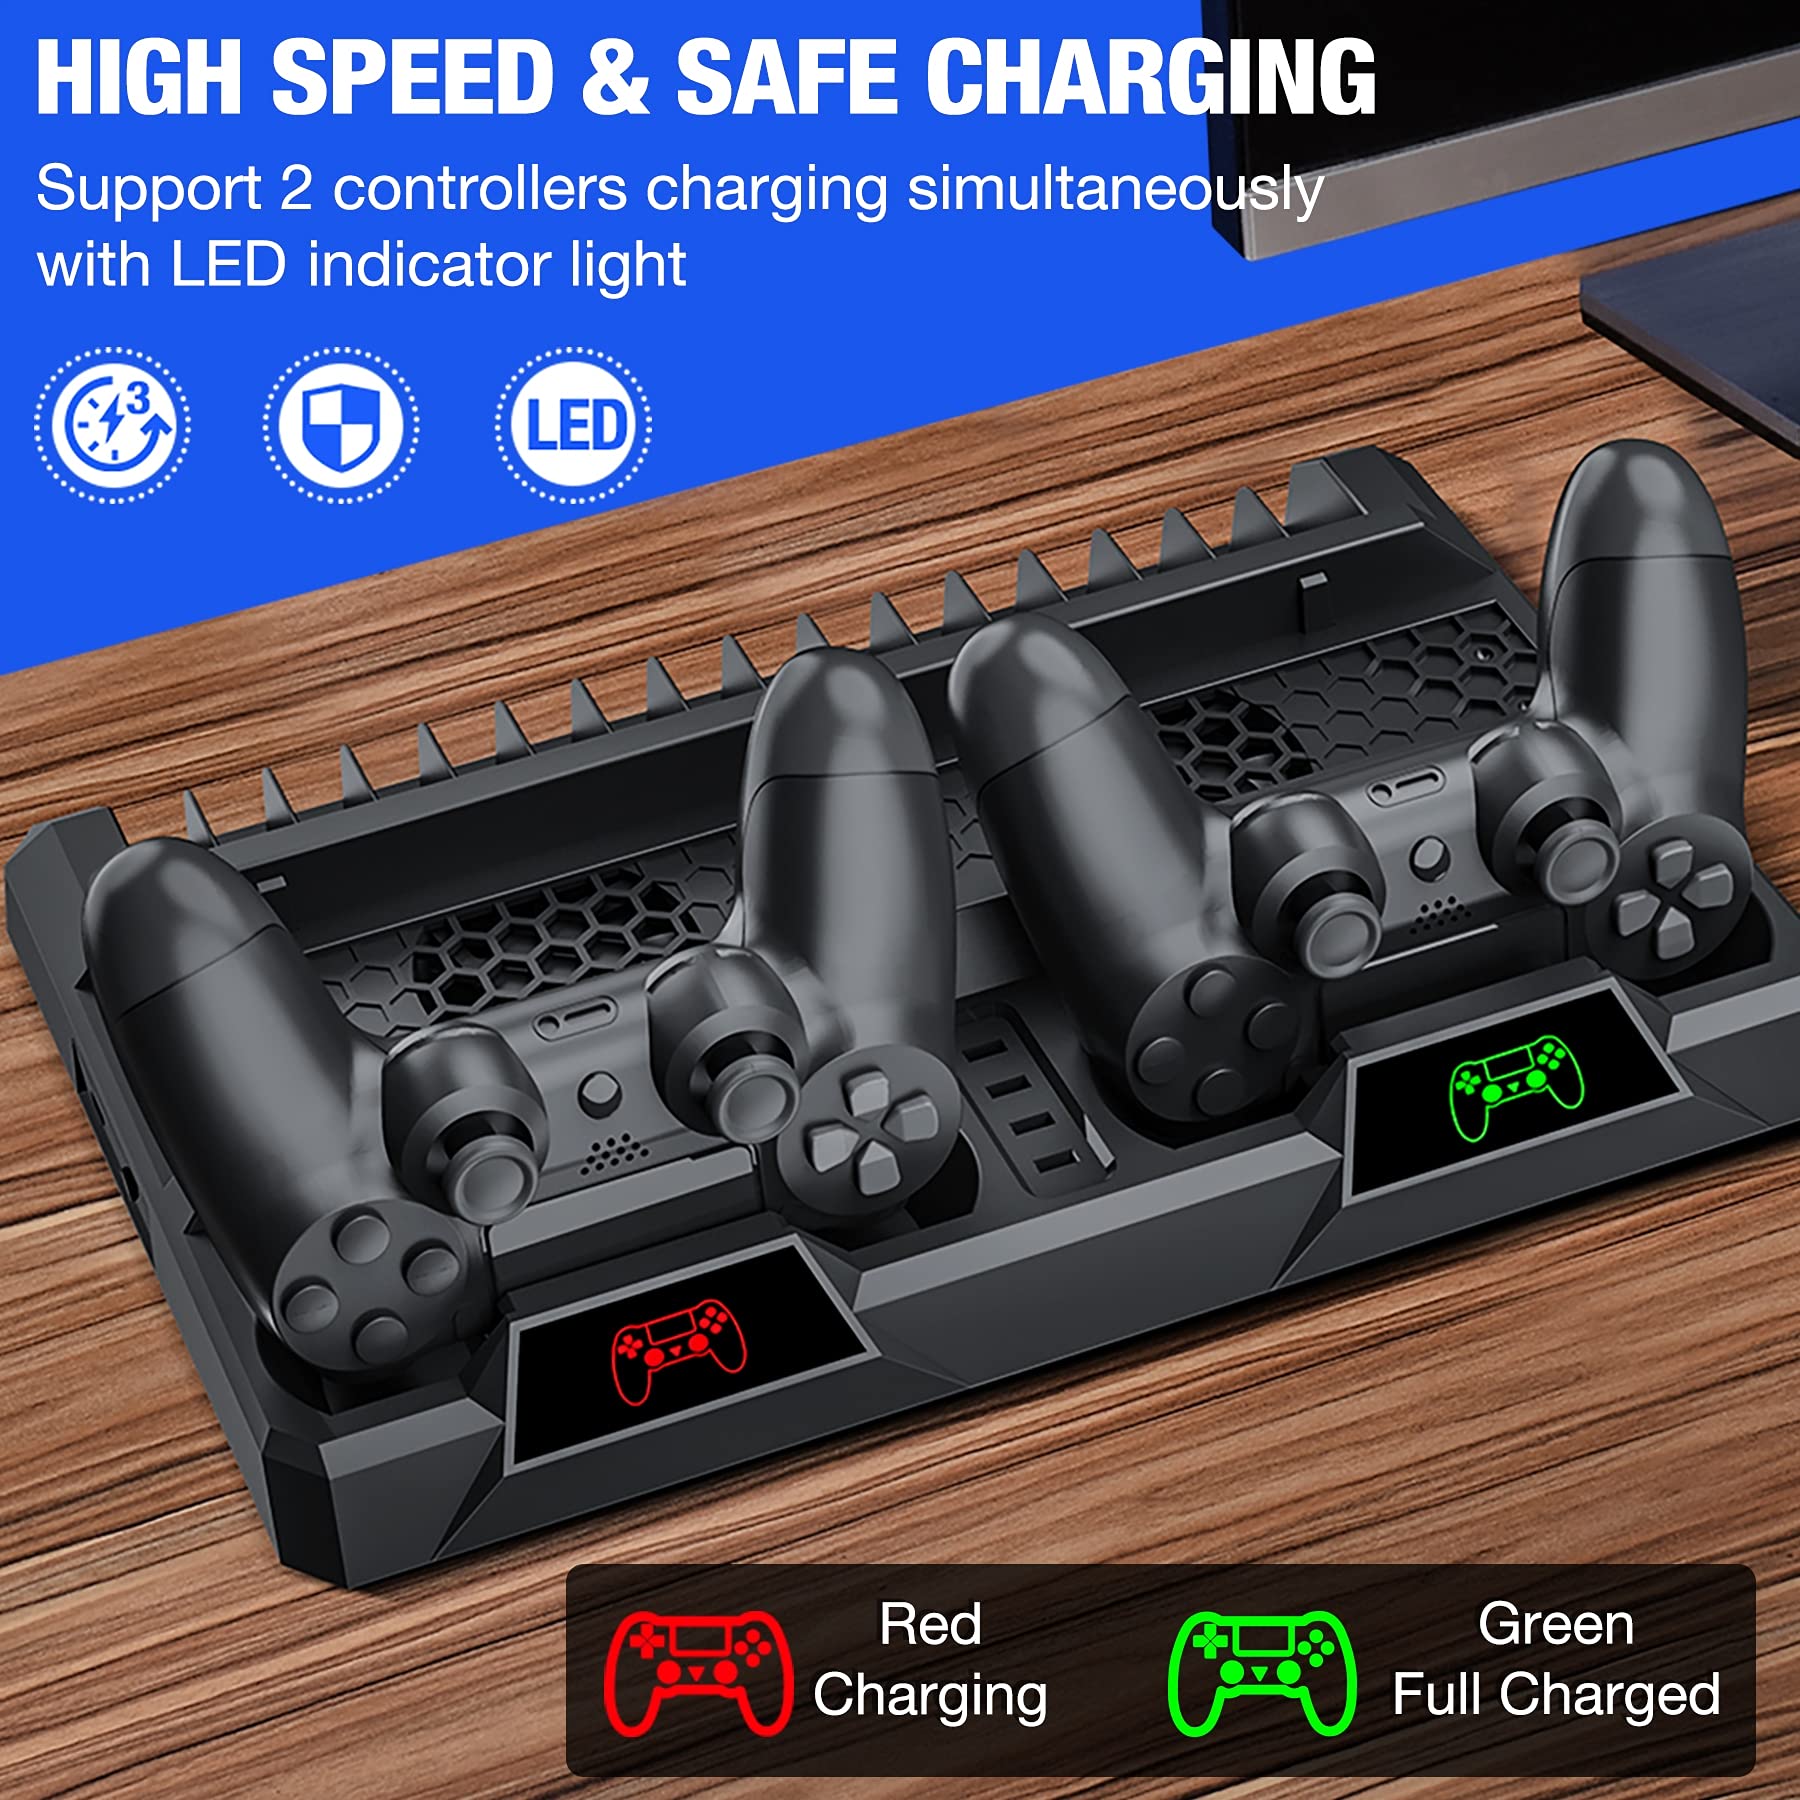 Kawaye PS4 Stand Cooling Fan for PS4 Slim/PS4 Pro/Playstation 4, PS4 Vertical Stand Cooler with Dual Controller Charge Station & 16 Game Storage, PS4 Organizer Stand with Game Storage PS4 Accessories